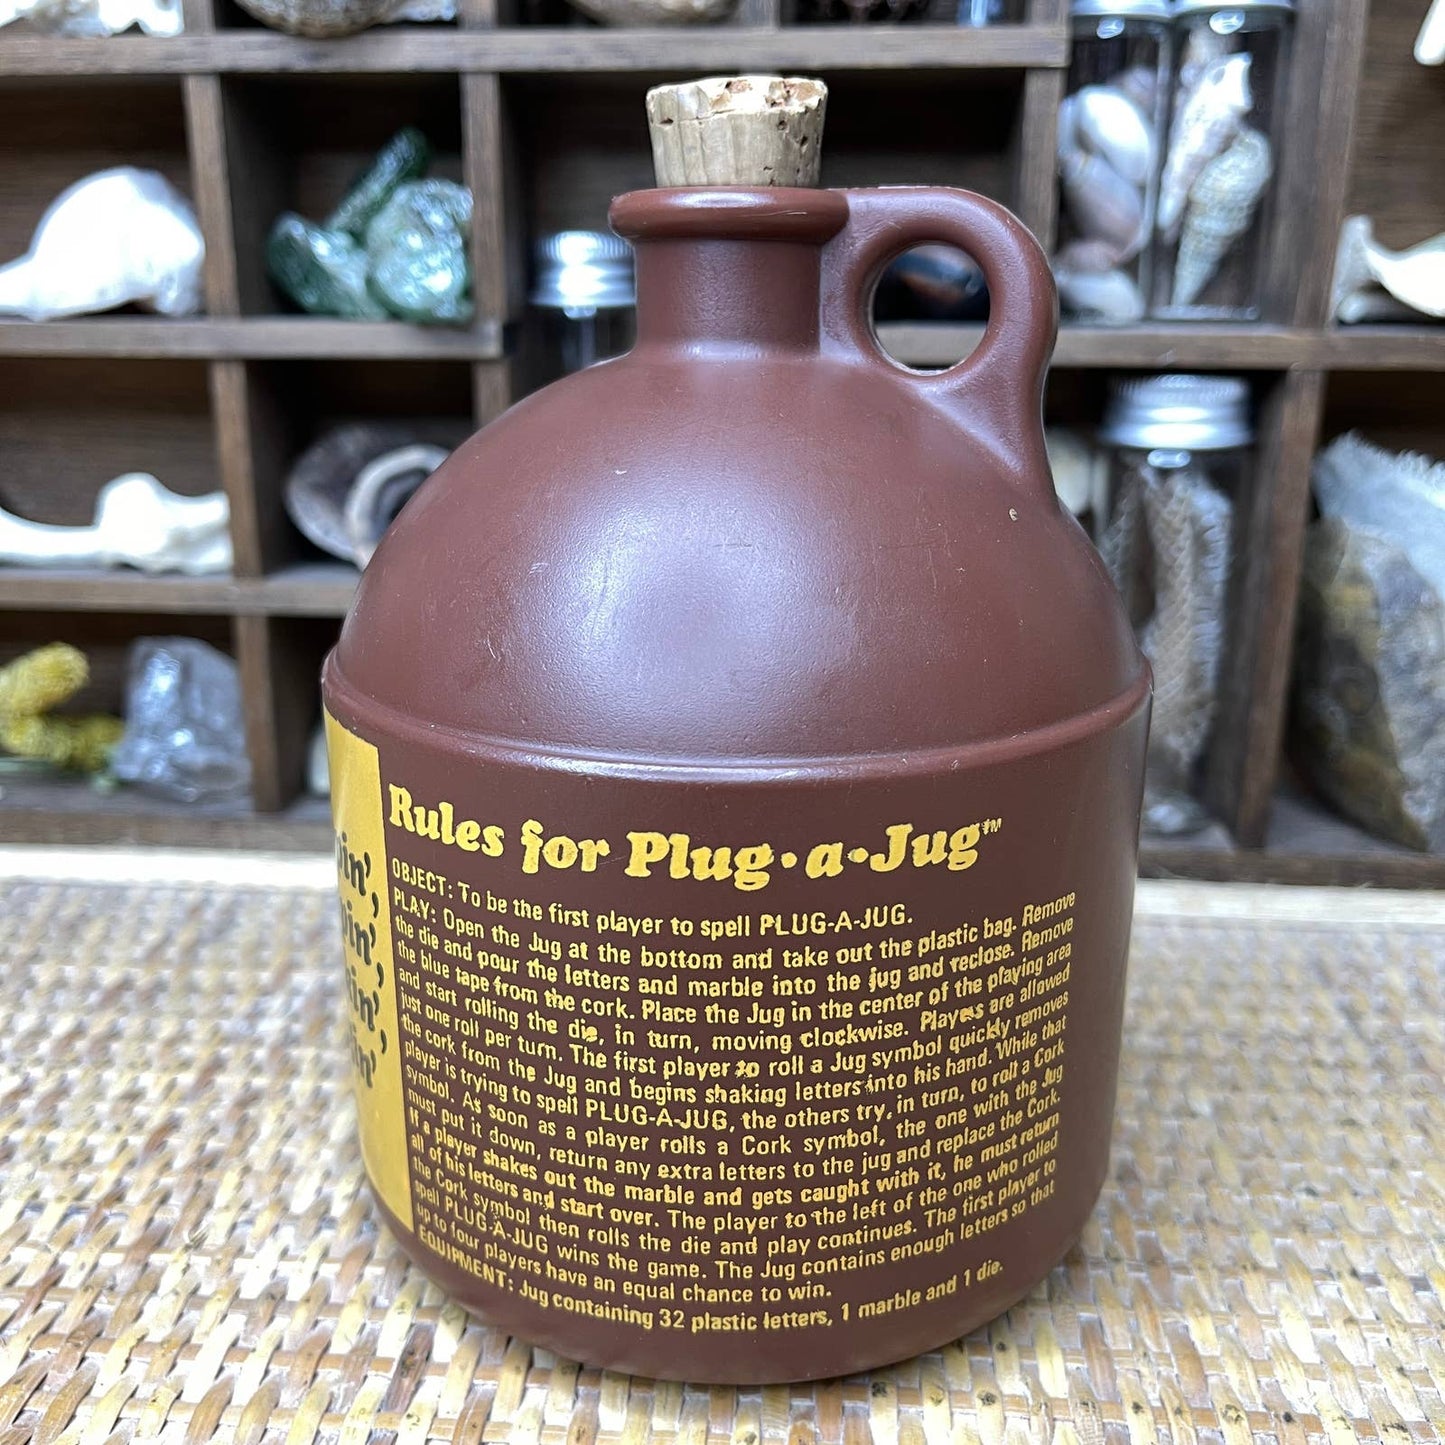 Vintage 60s Game Plug a Jug Brown Plastic Jug Container by Parker Brothers